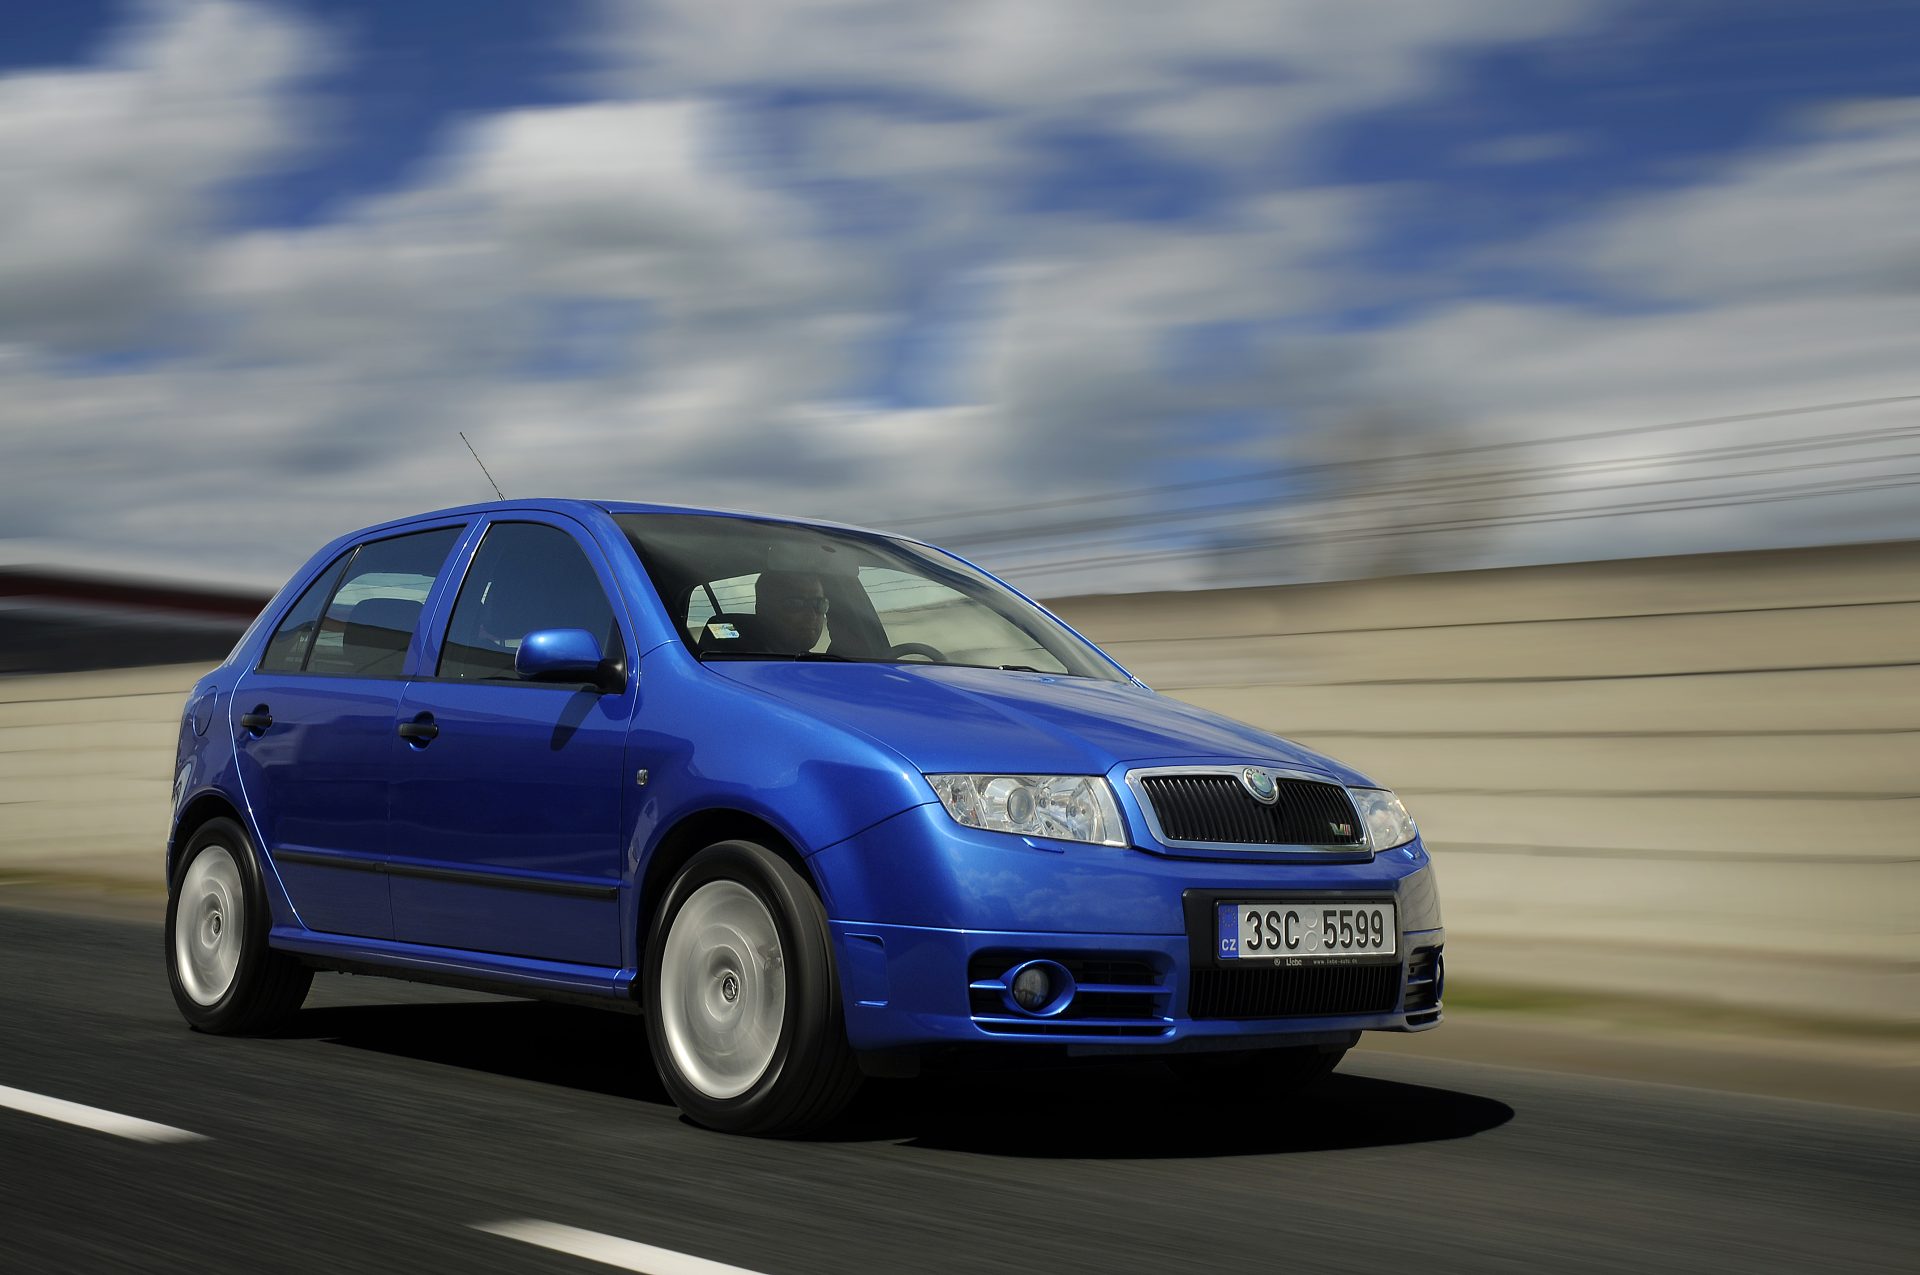 The Skoda Fabia vRS packed performance in an understated package